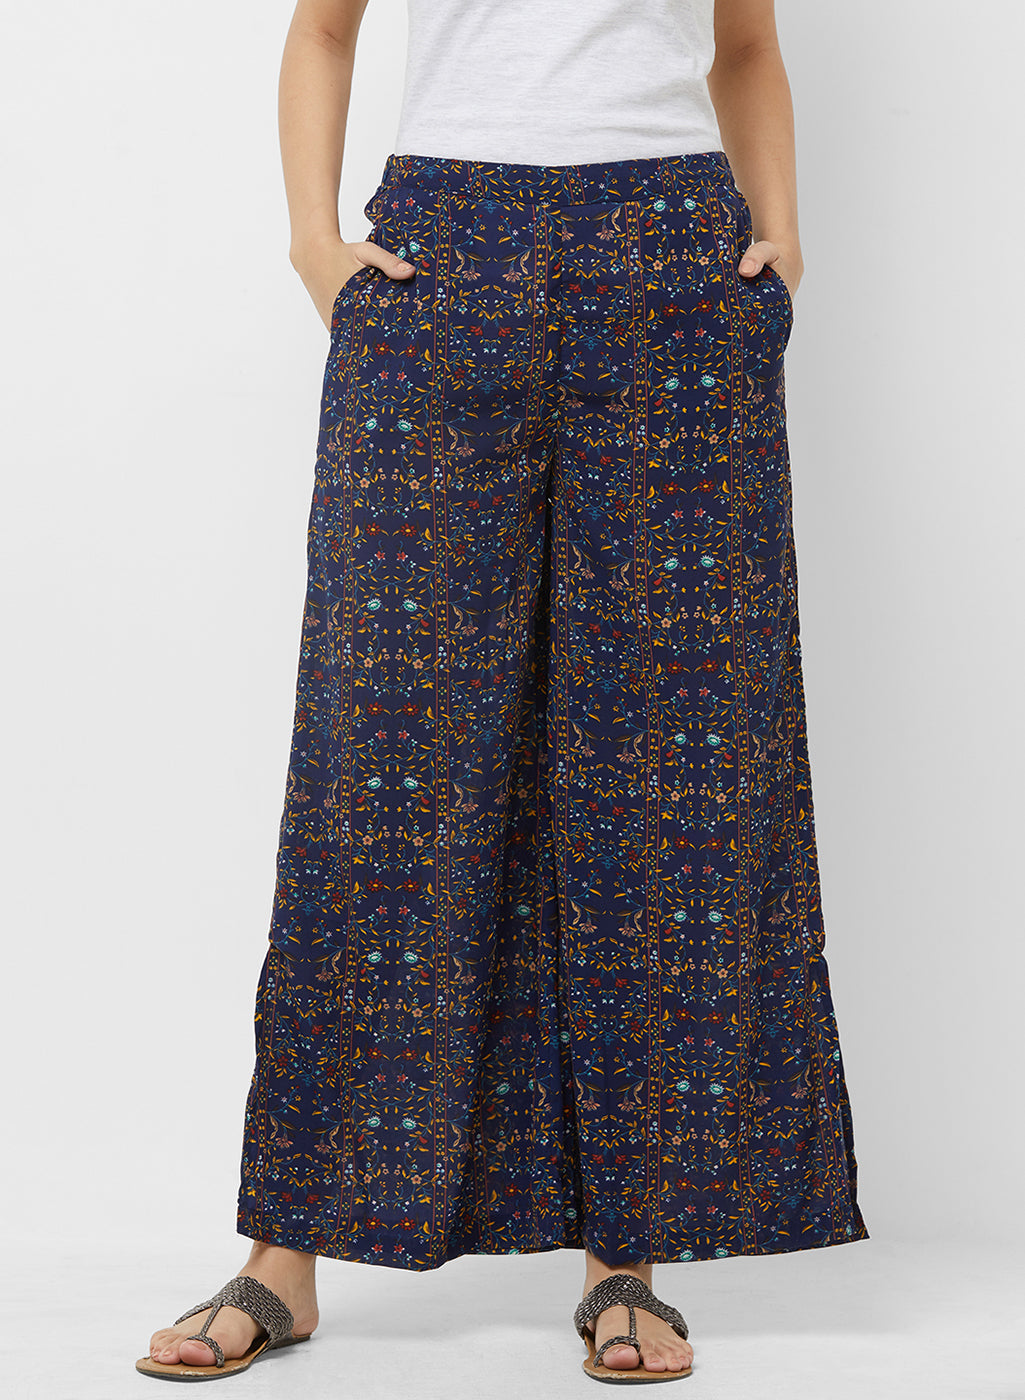 Enticing And Alluring SpringFriendly Printed Palazzo Pants